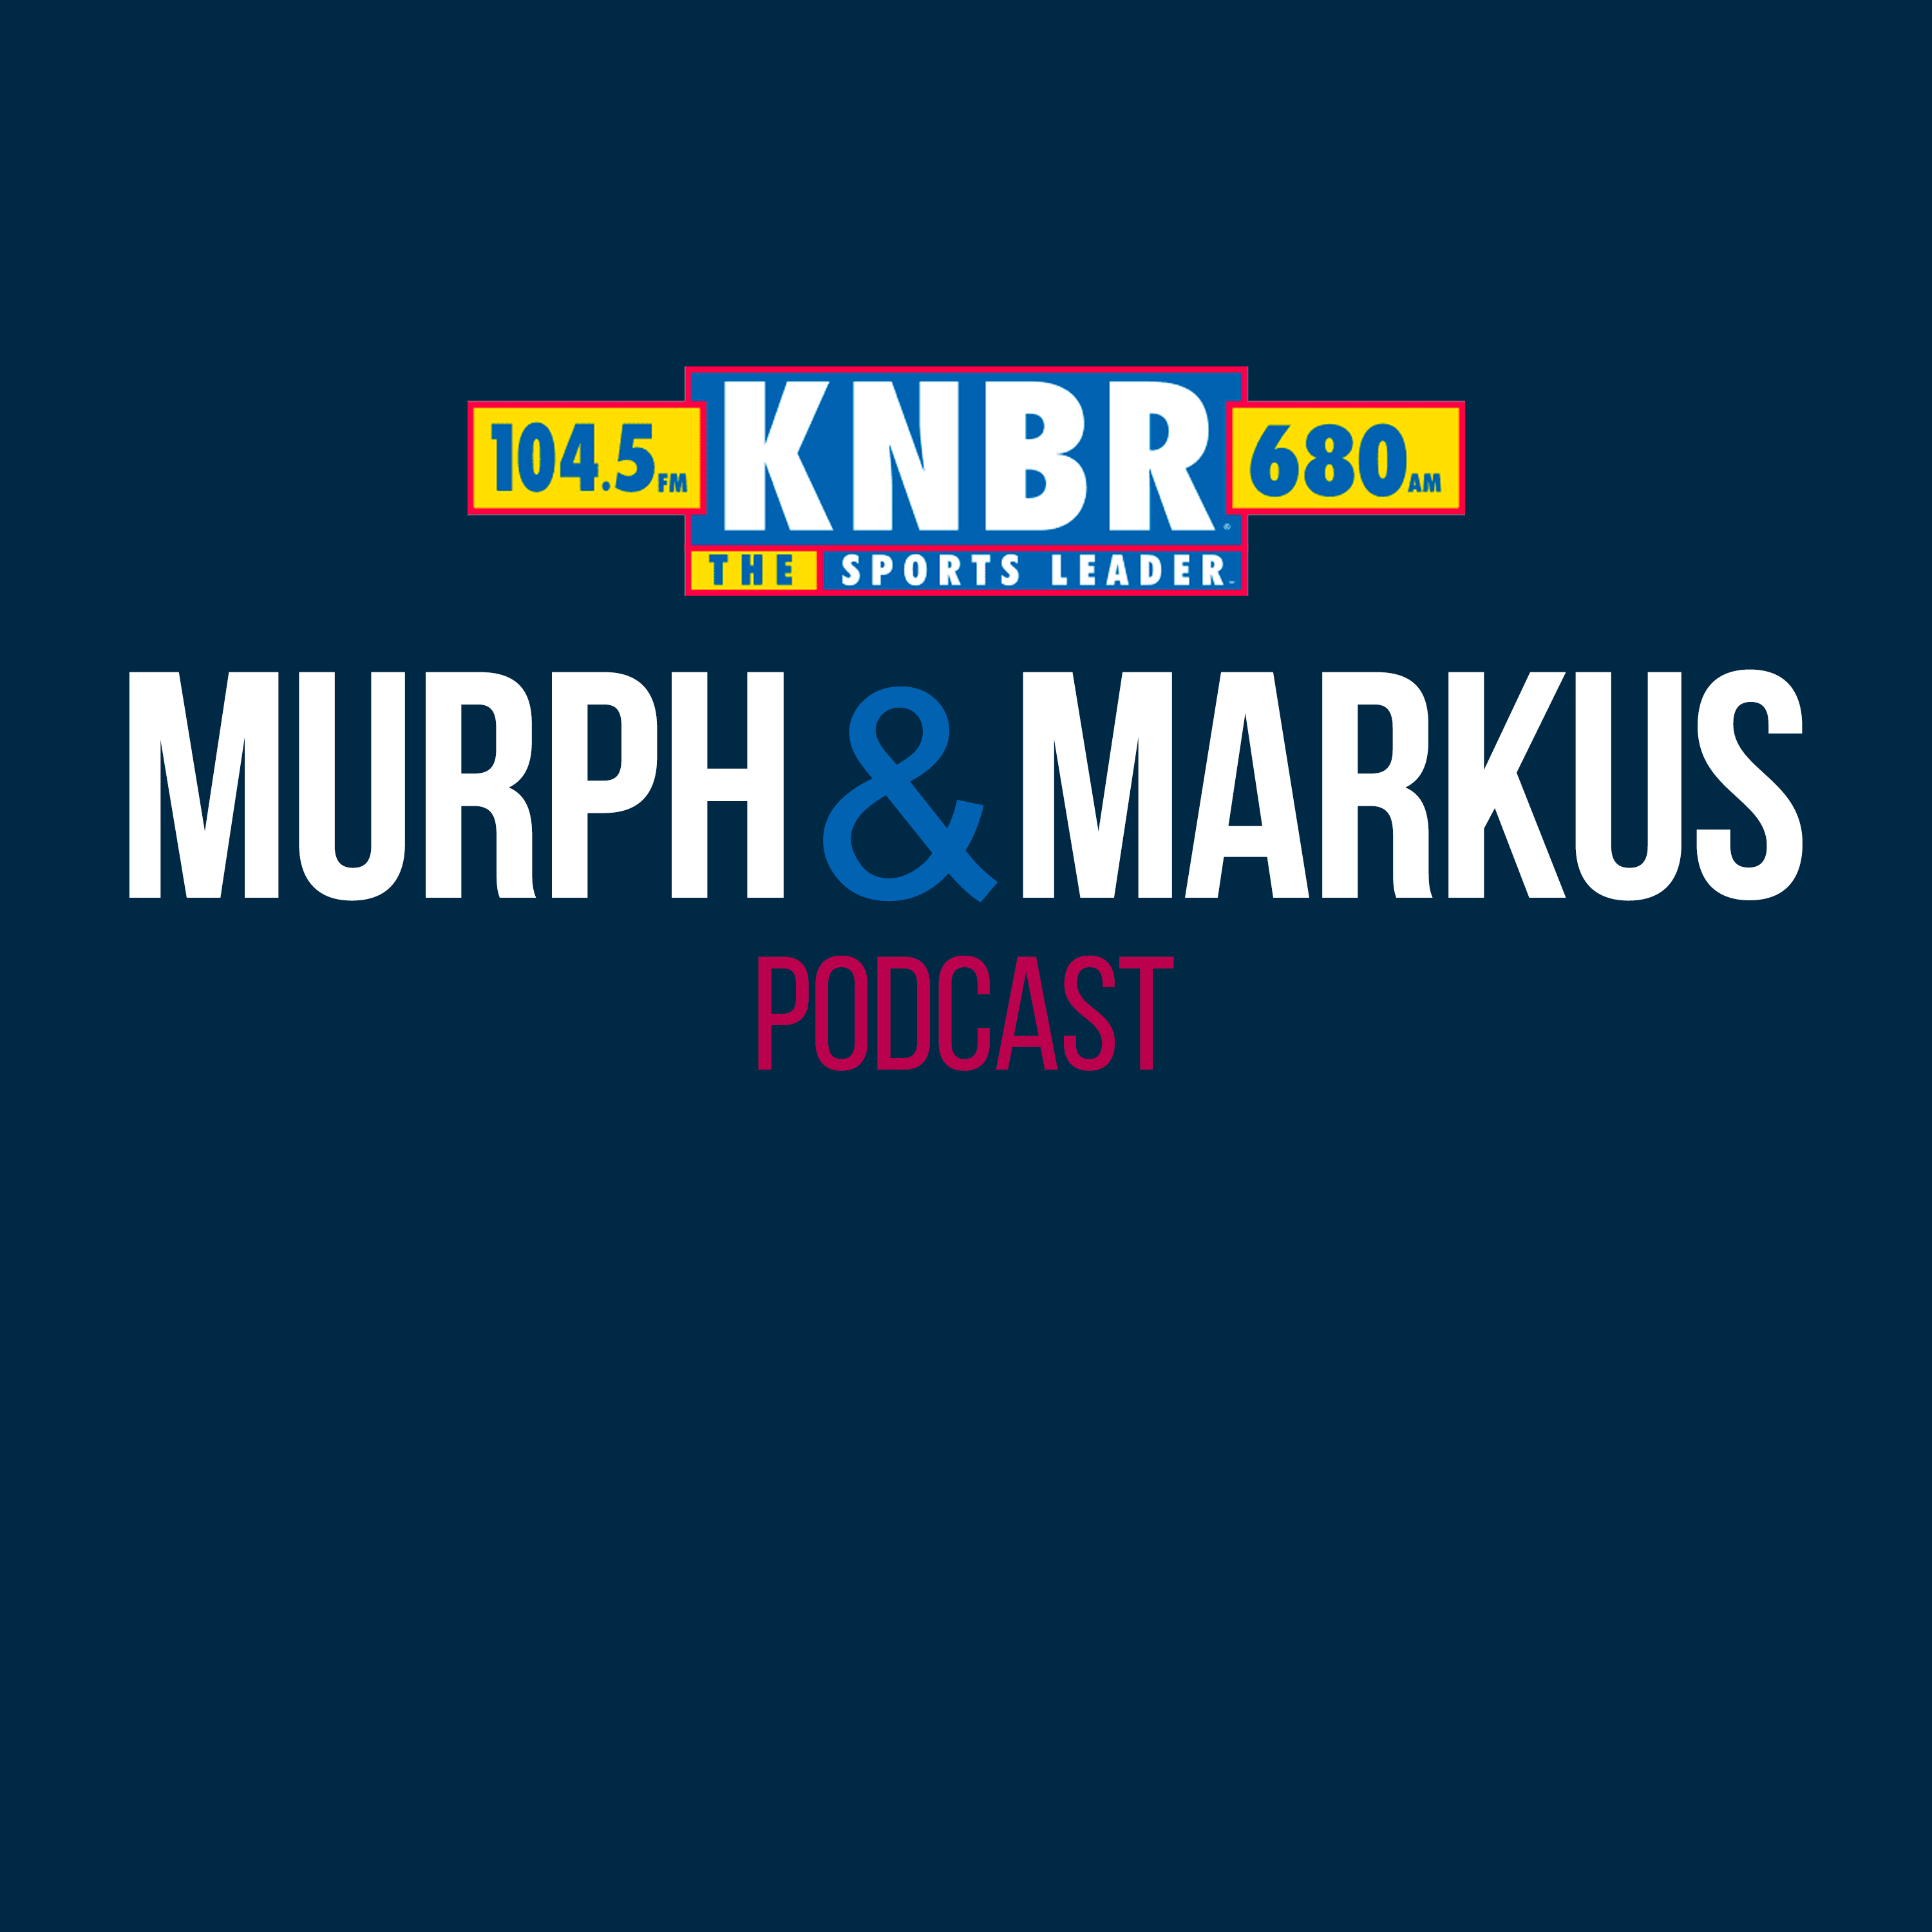 4-10 Hour 2: Murph & Markus discuss the Warriors path to the 8 seed after beating the Lakers last night, talk to Mike Krukow, & get into today's top story in the Big Hit